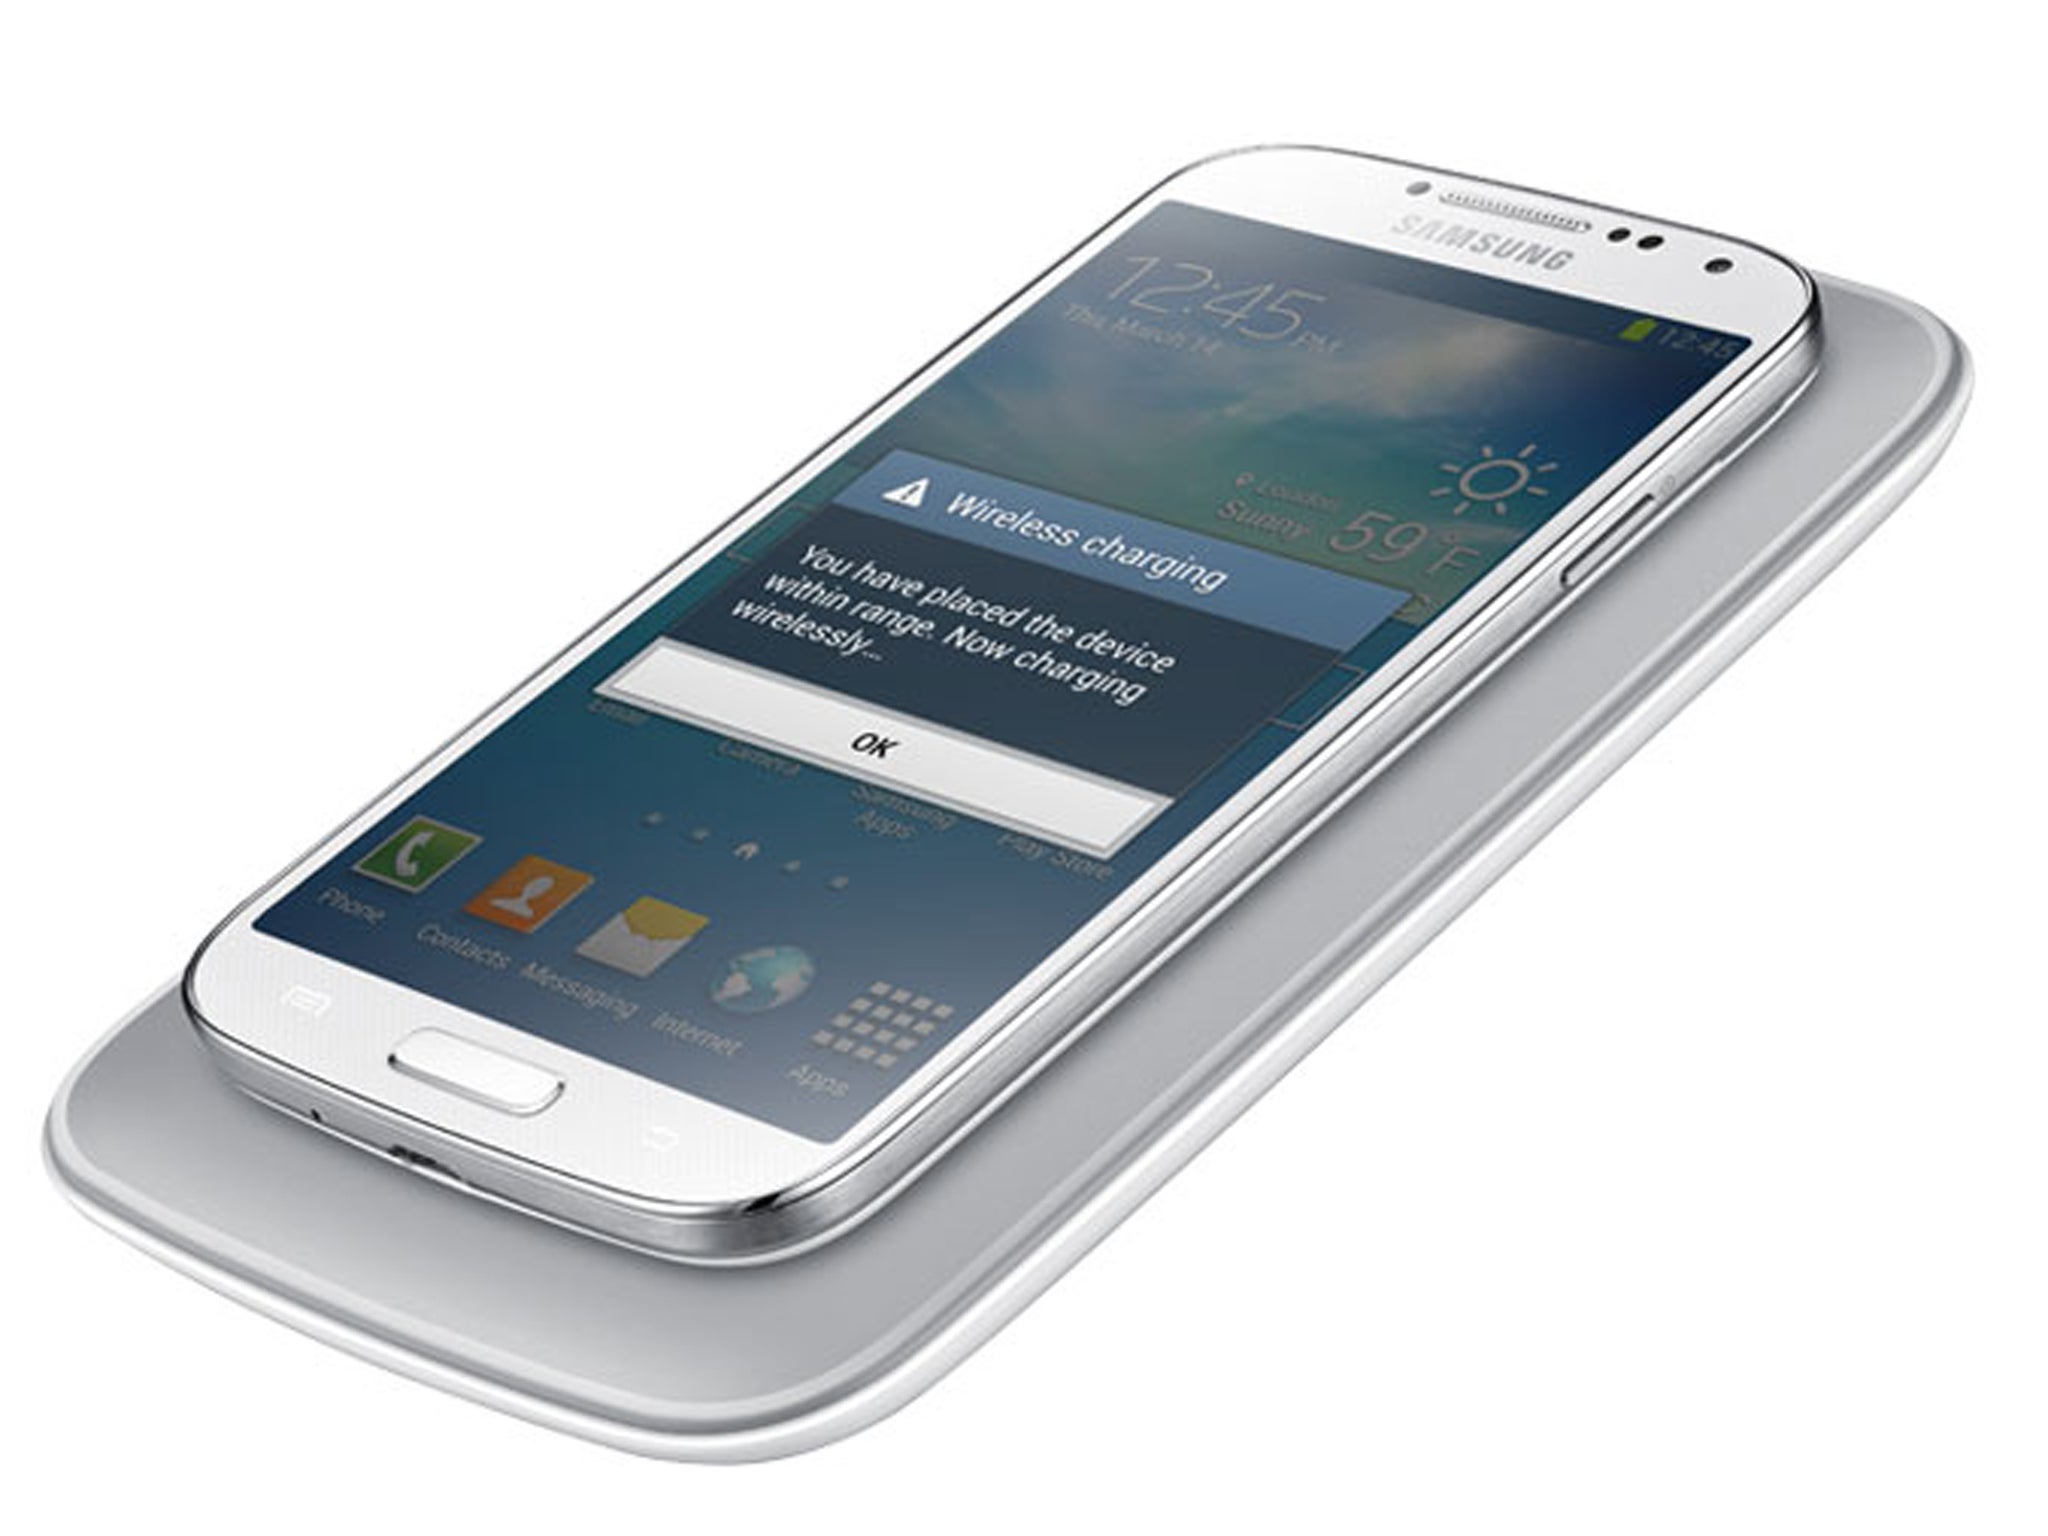 The Galaxy S5, which supports wireless charging but only with an additional accessory